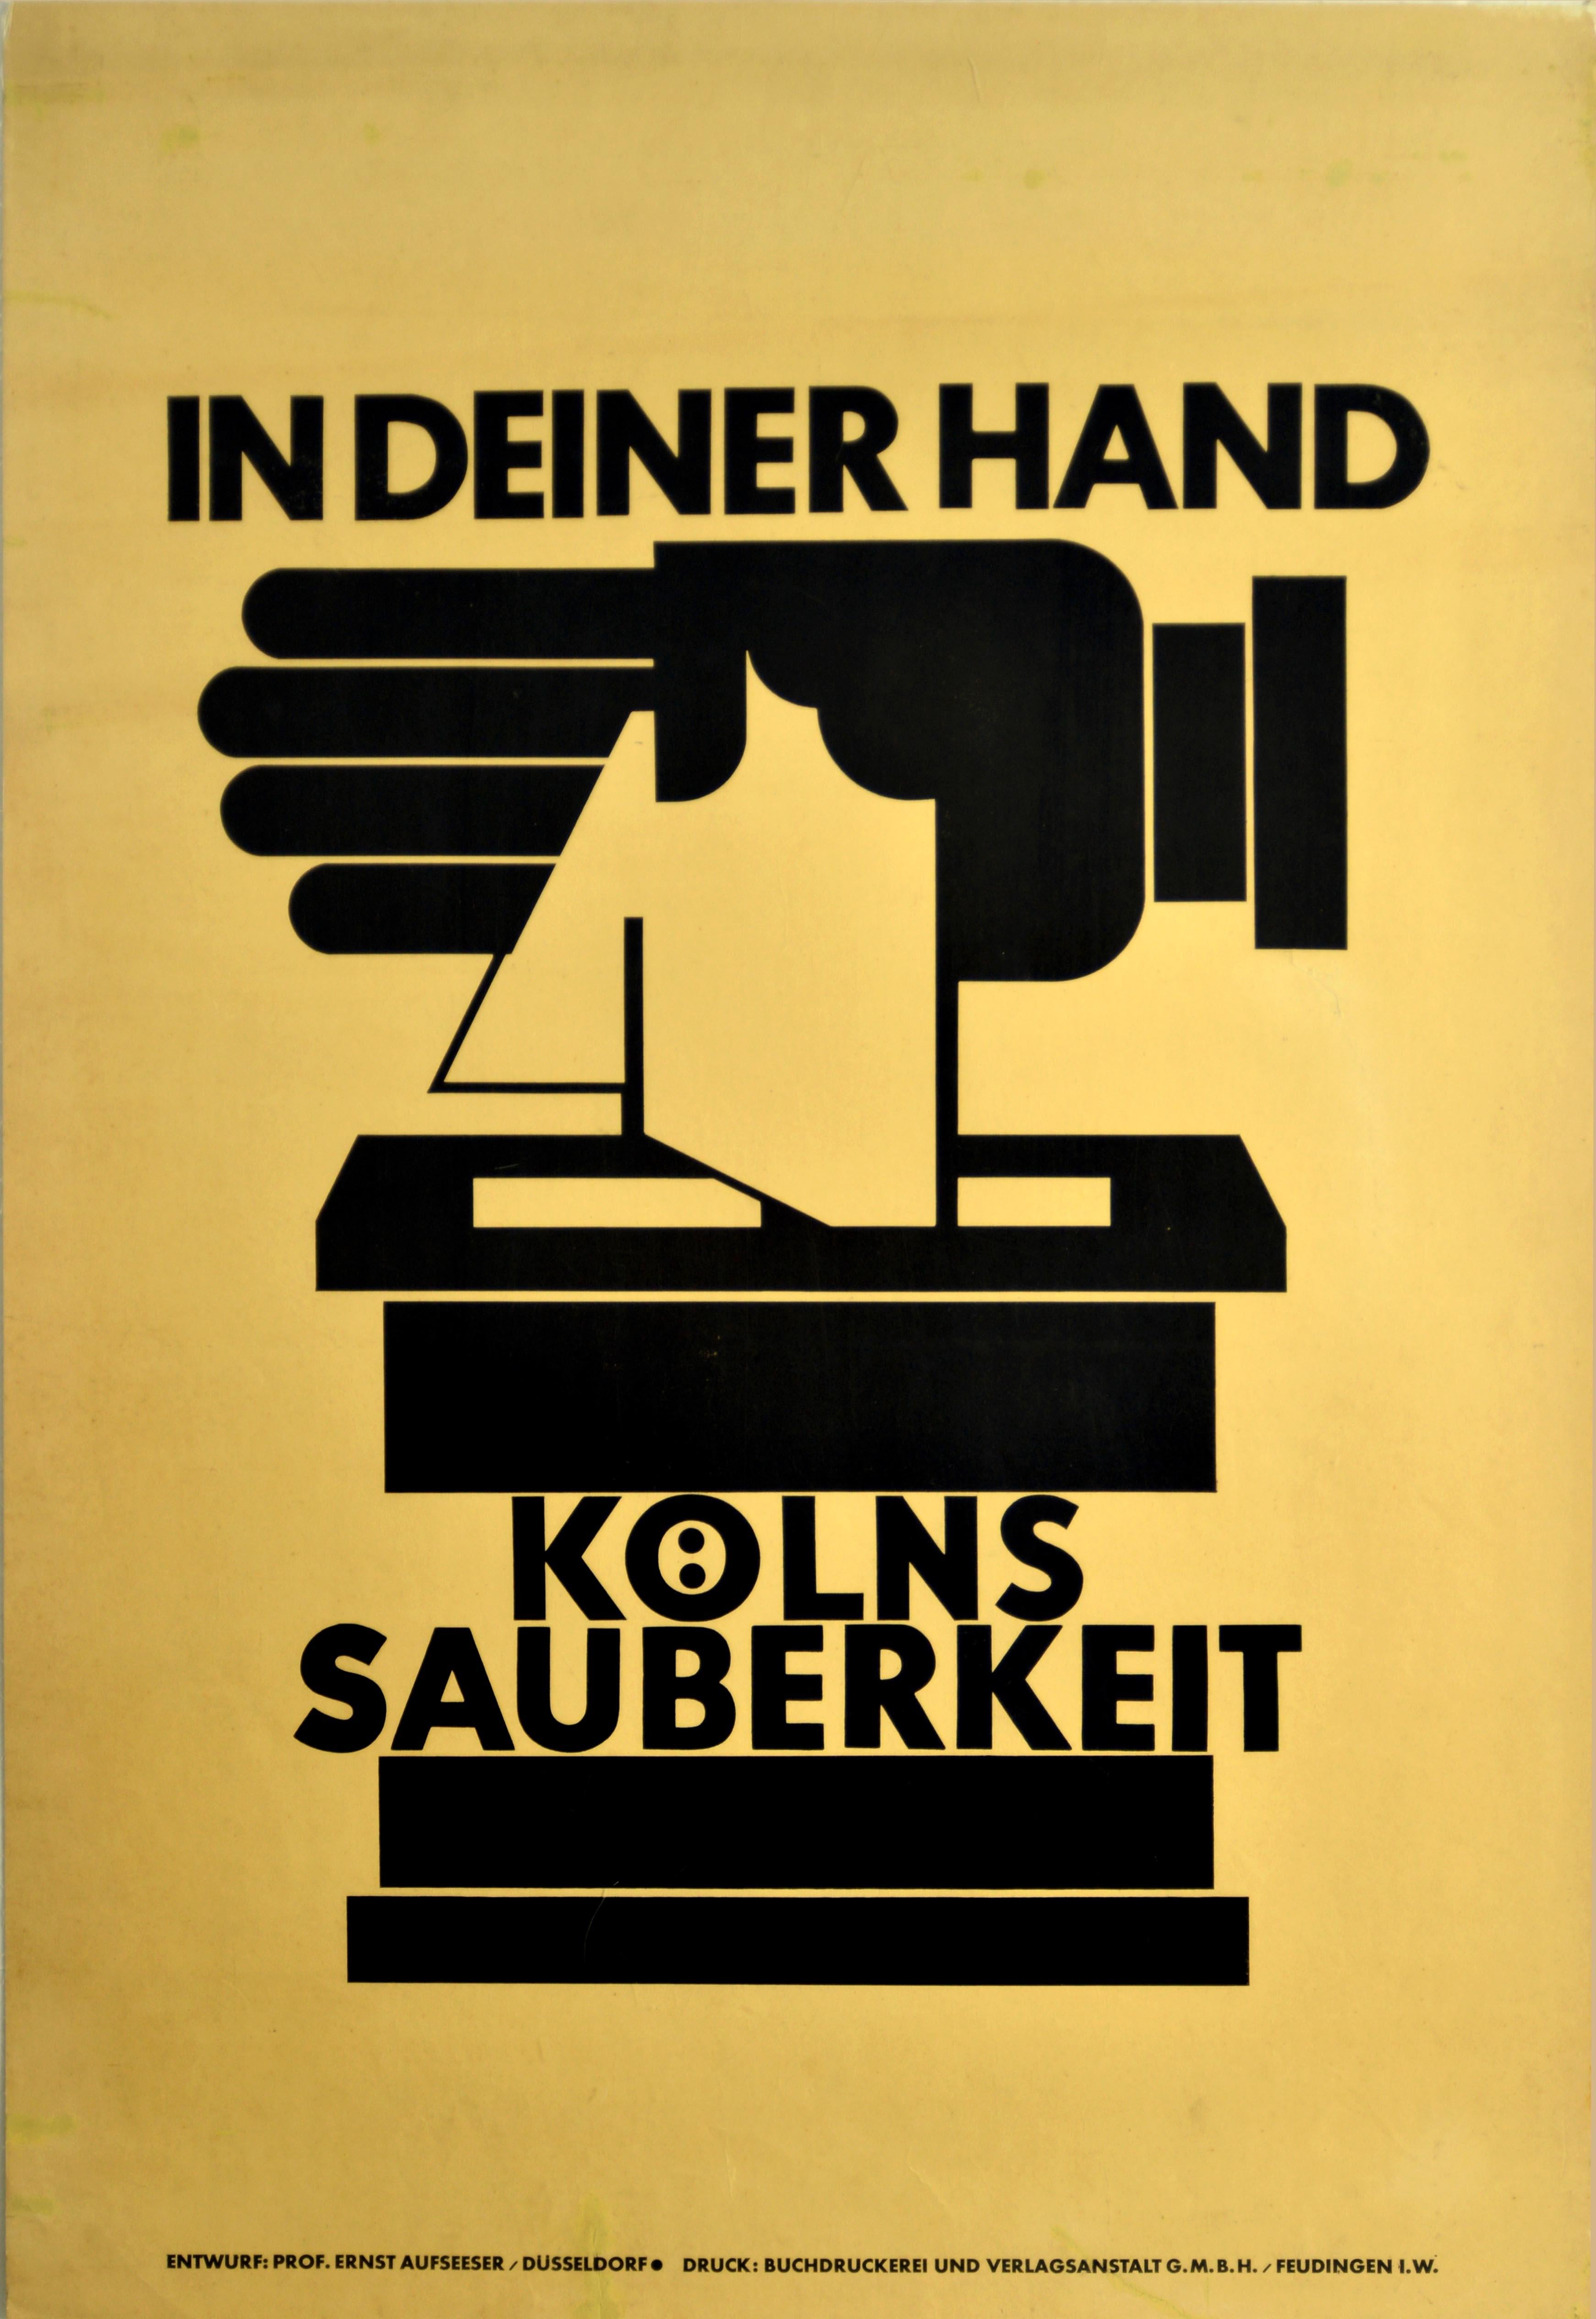 Original Vintage Poster Cleanliness In Your Hand Hygiene Bauhaus Graphic Design